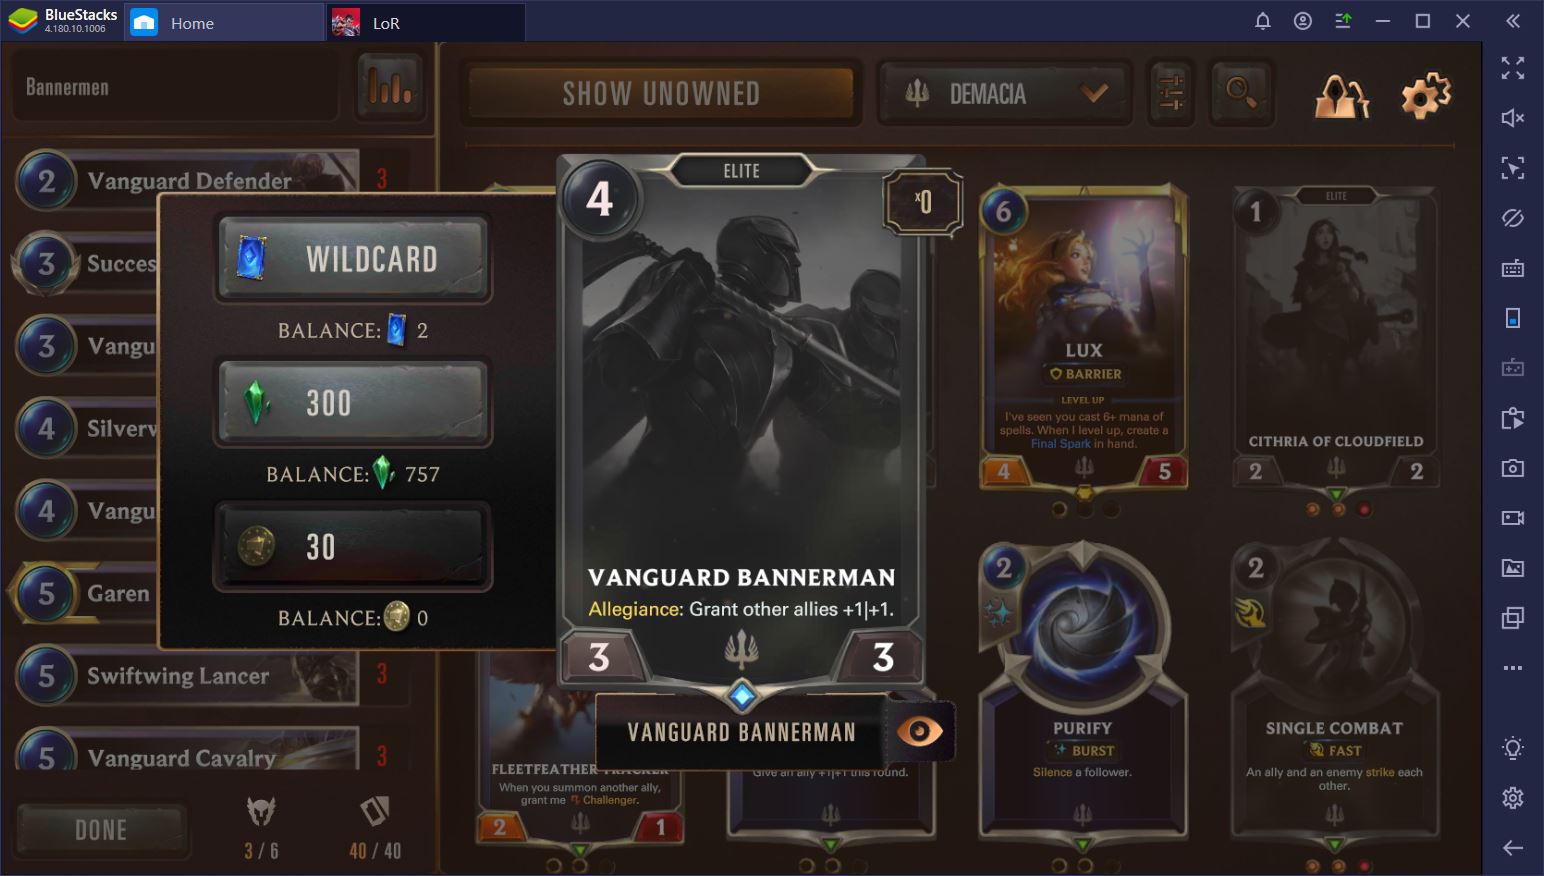 Legends of Runeterra on PC - How to Win New Cards and Expand Your Decks